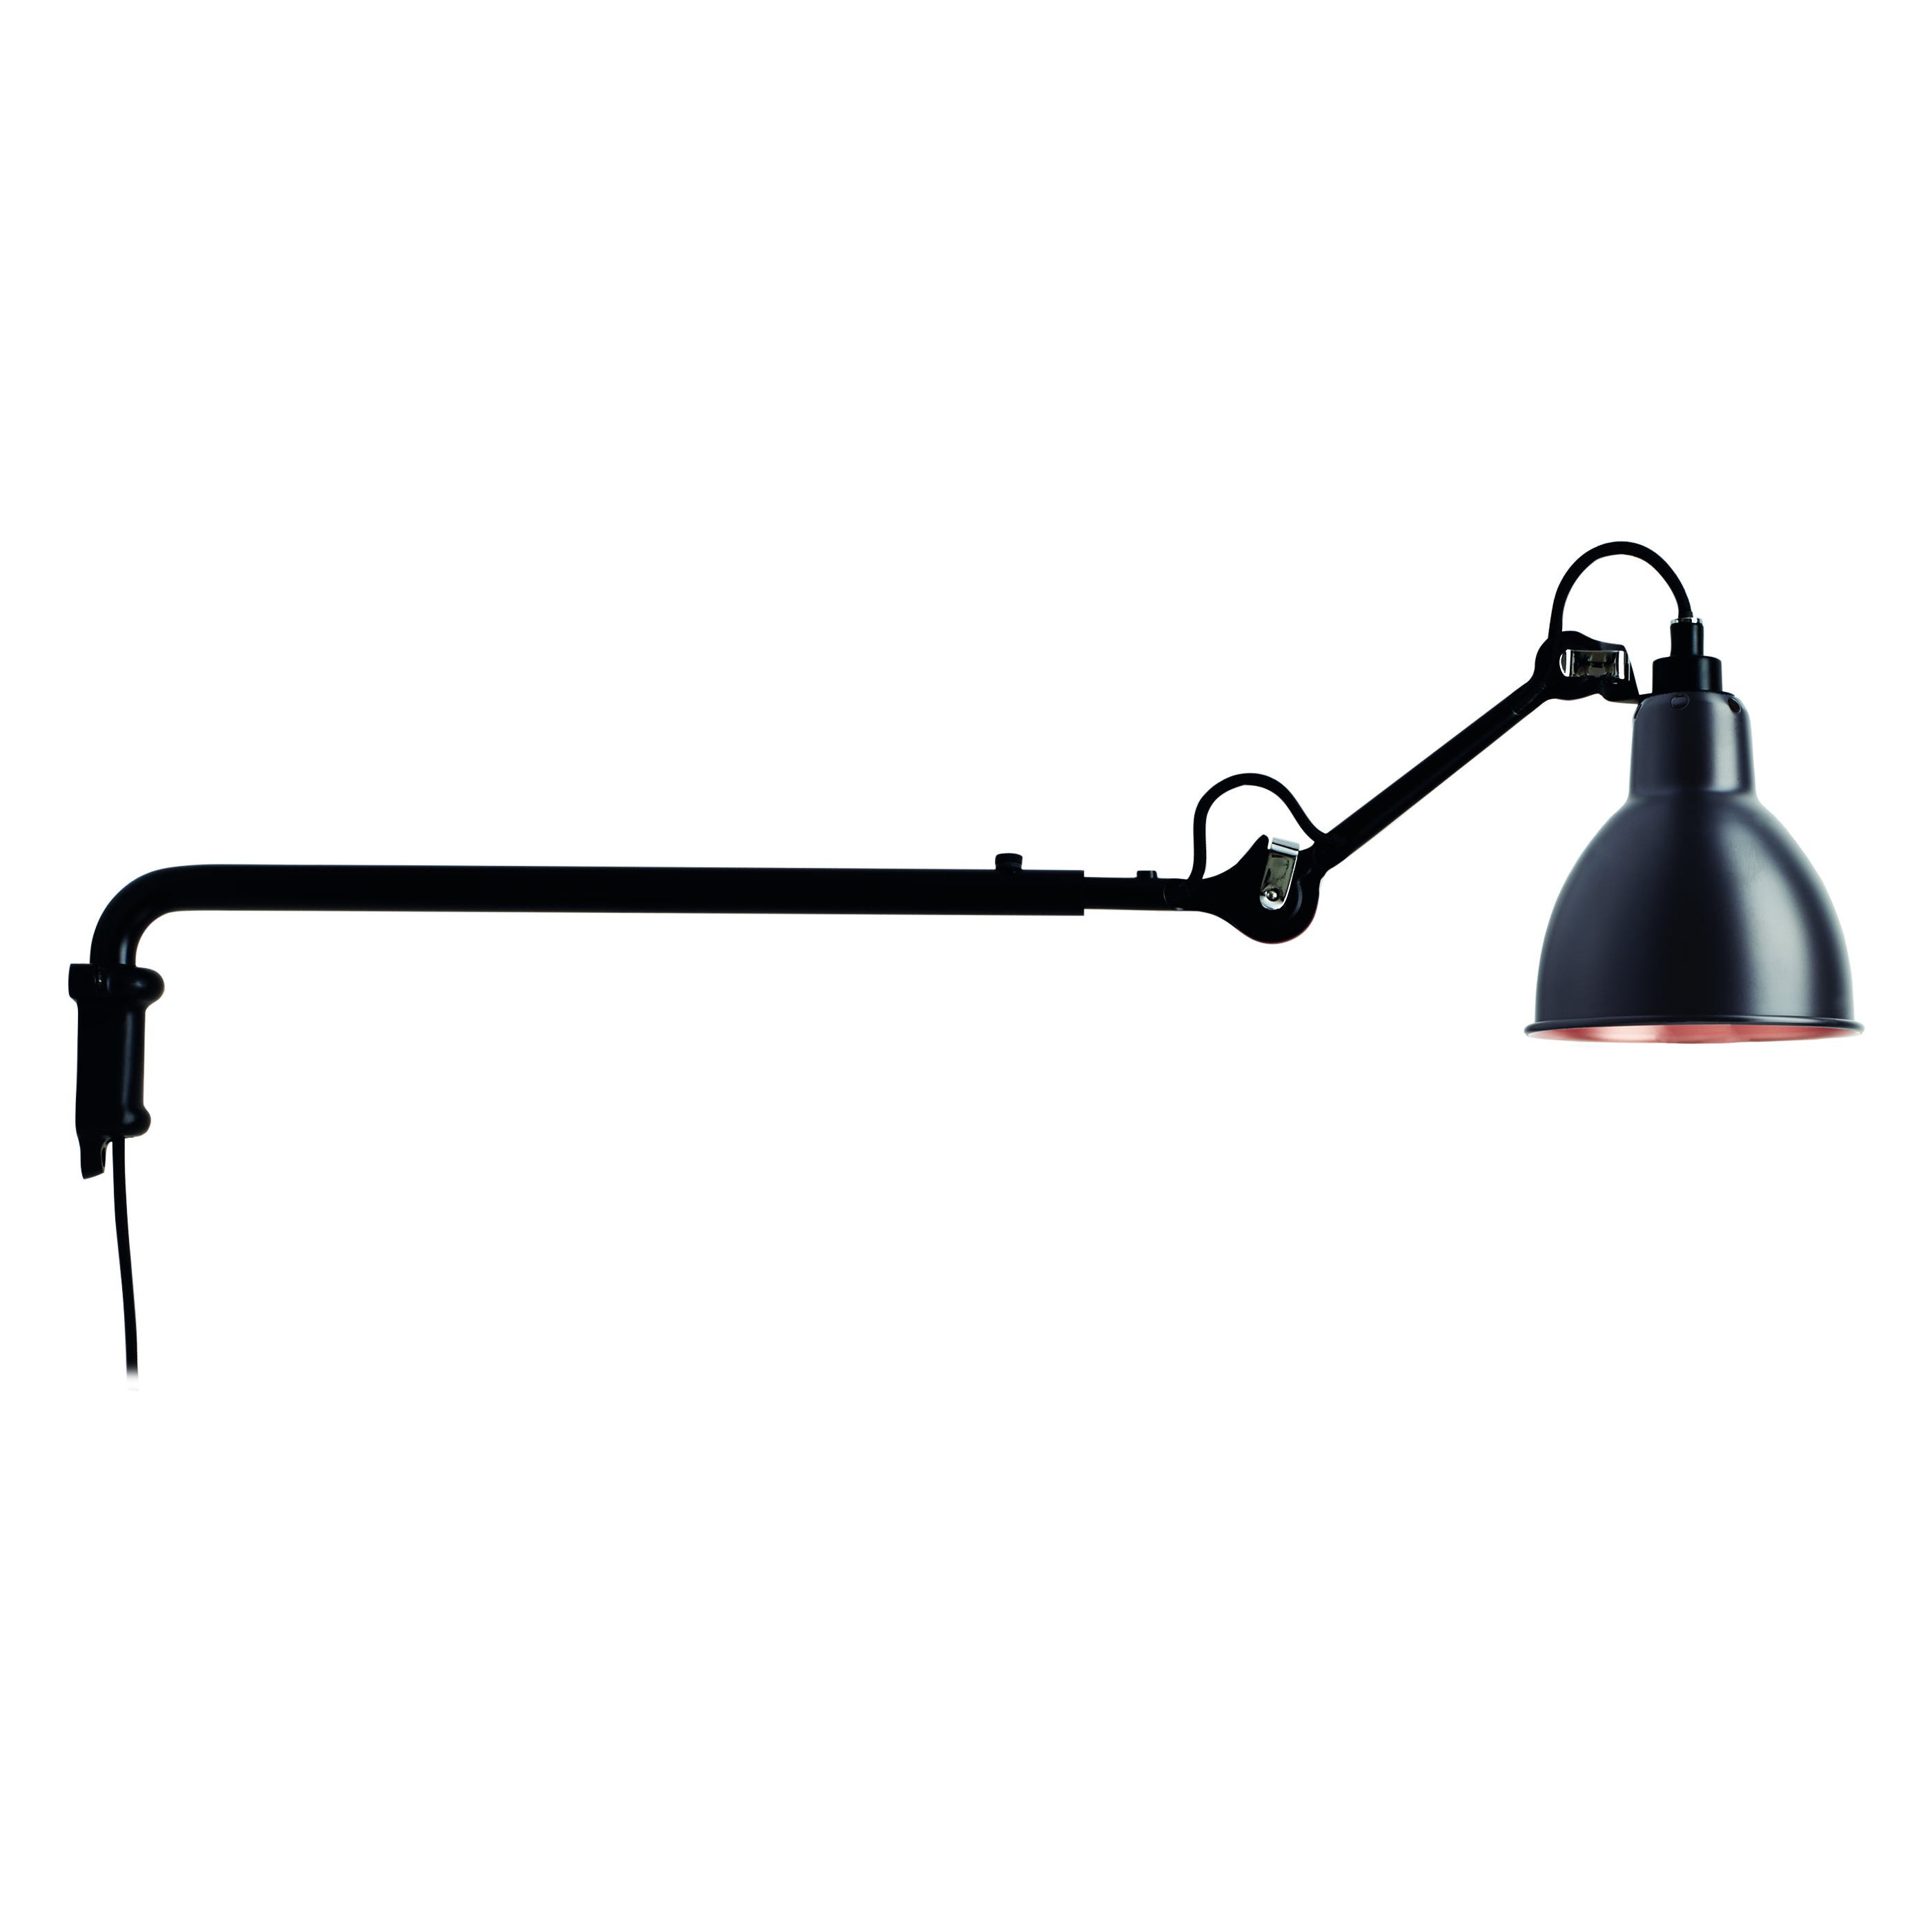 DCW Editions La Lampe Gras N°203 Wall Lamp in Black Steel Arm and Copper Shade